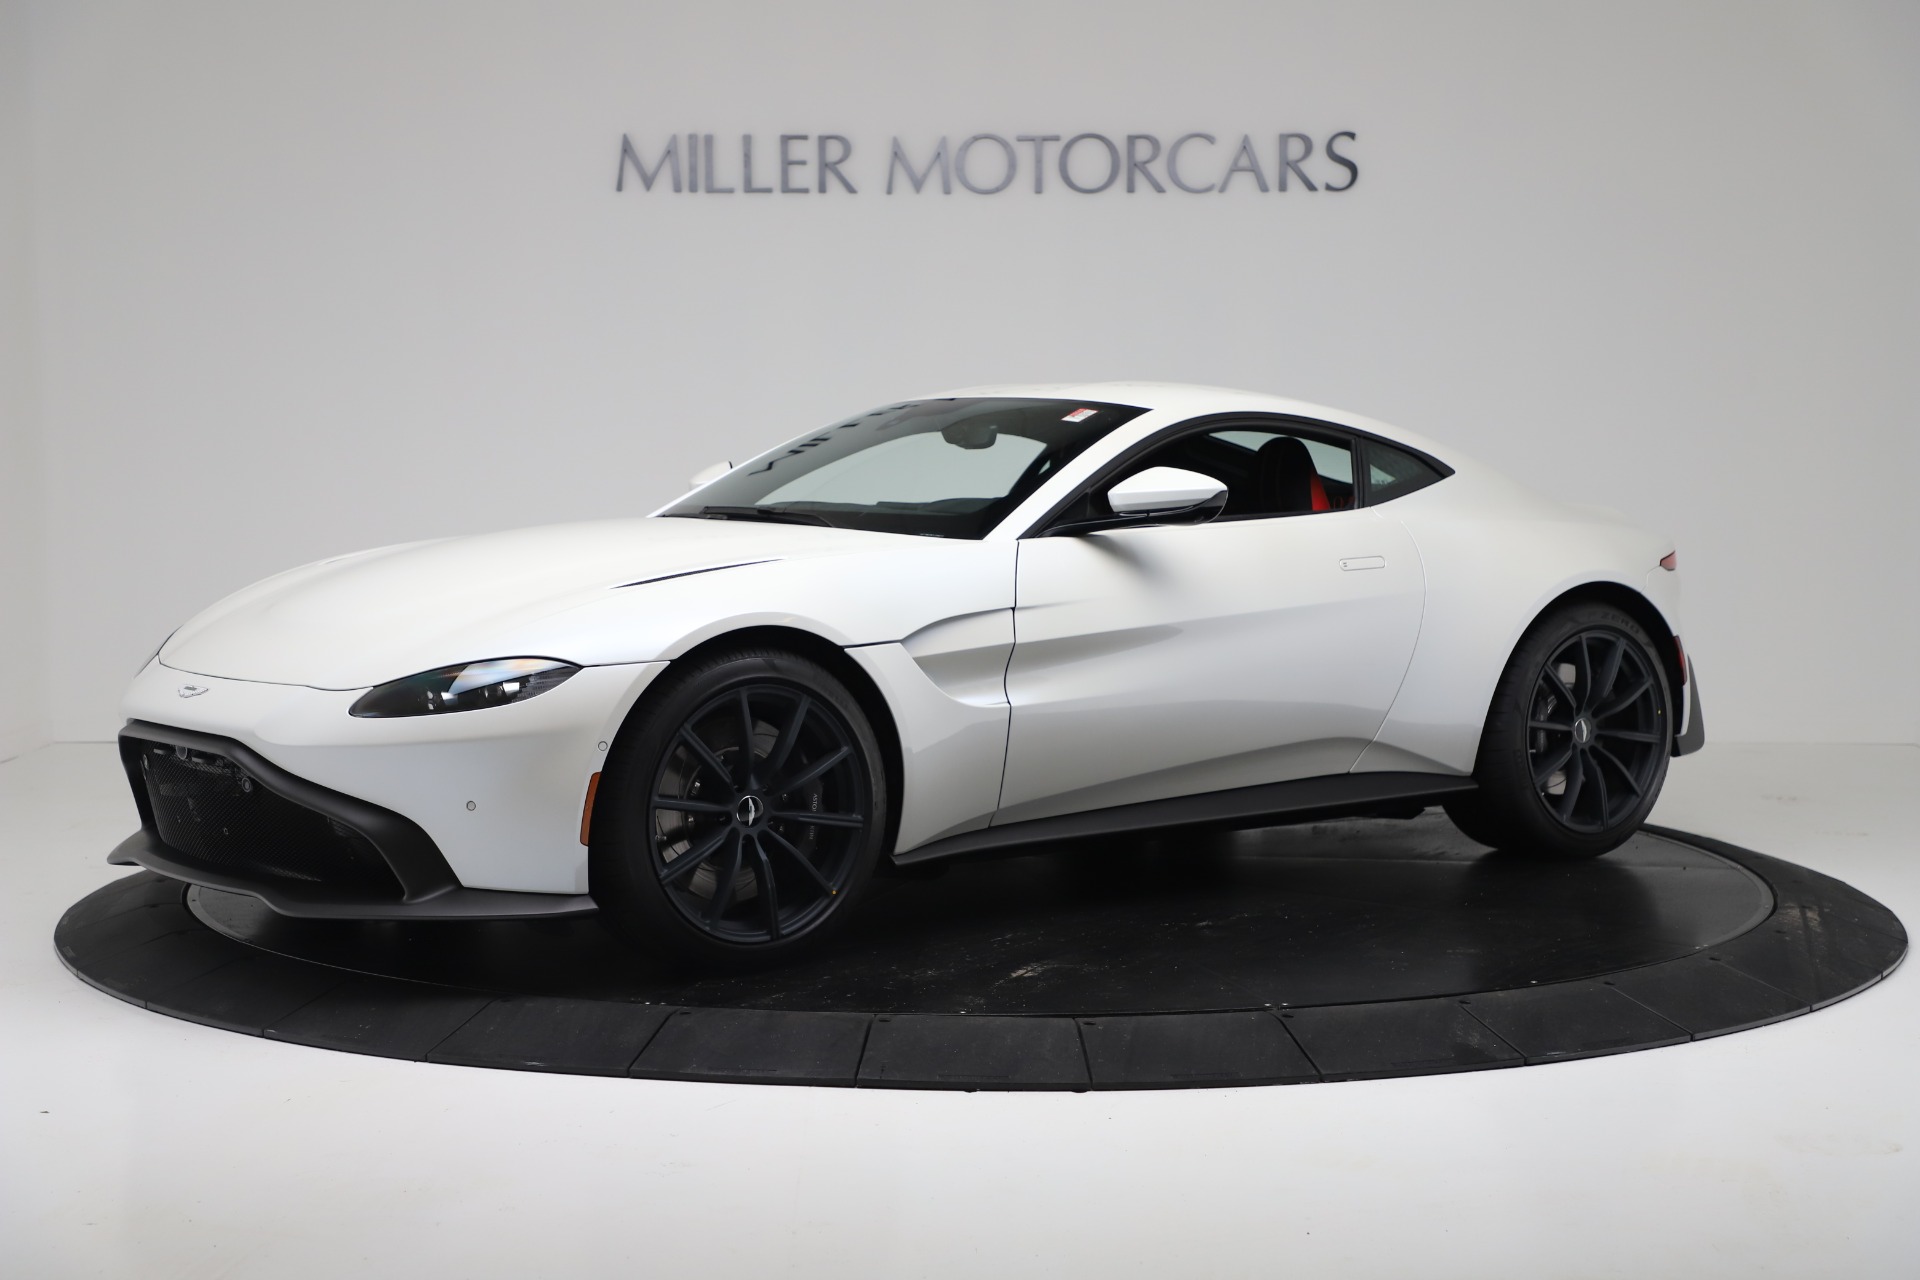 New 2020 Aston Martin Vantage Coupe for sale Sold at Maserati of Westport in Westport CT 06880 1